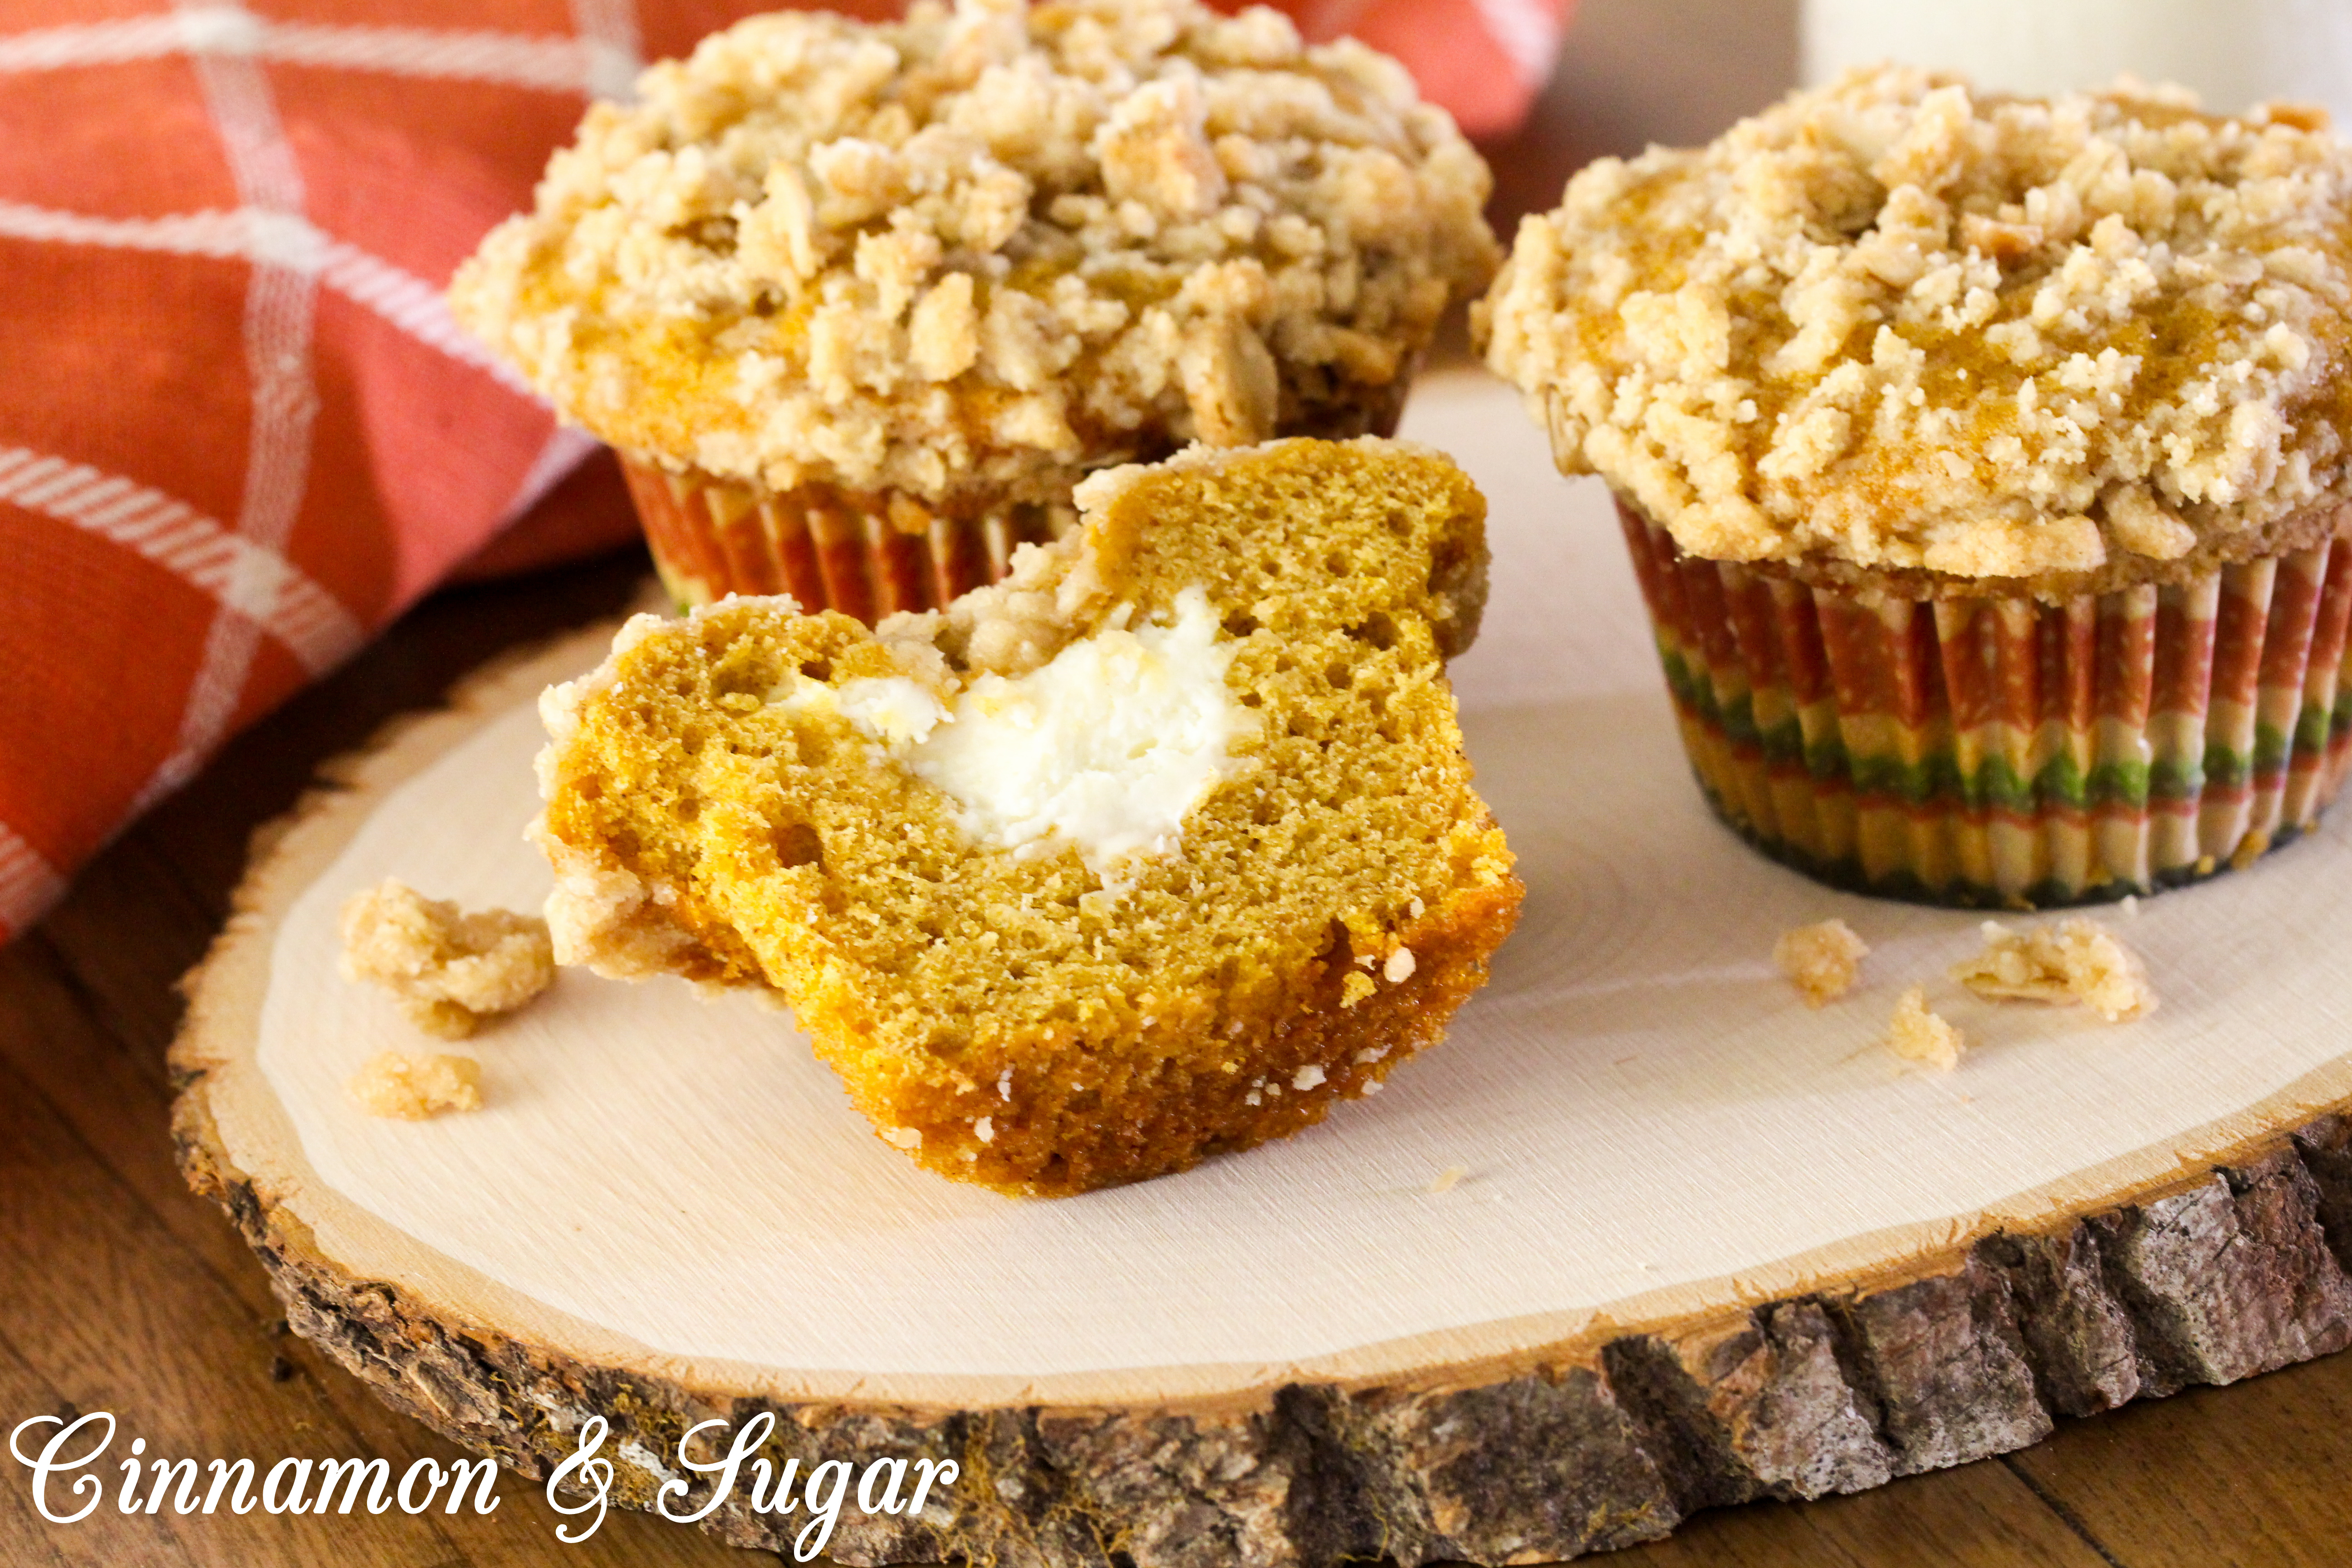 Pumpkin Cream Cheese-filled Muffins with Streusel Topping